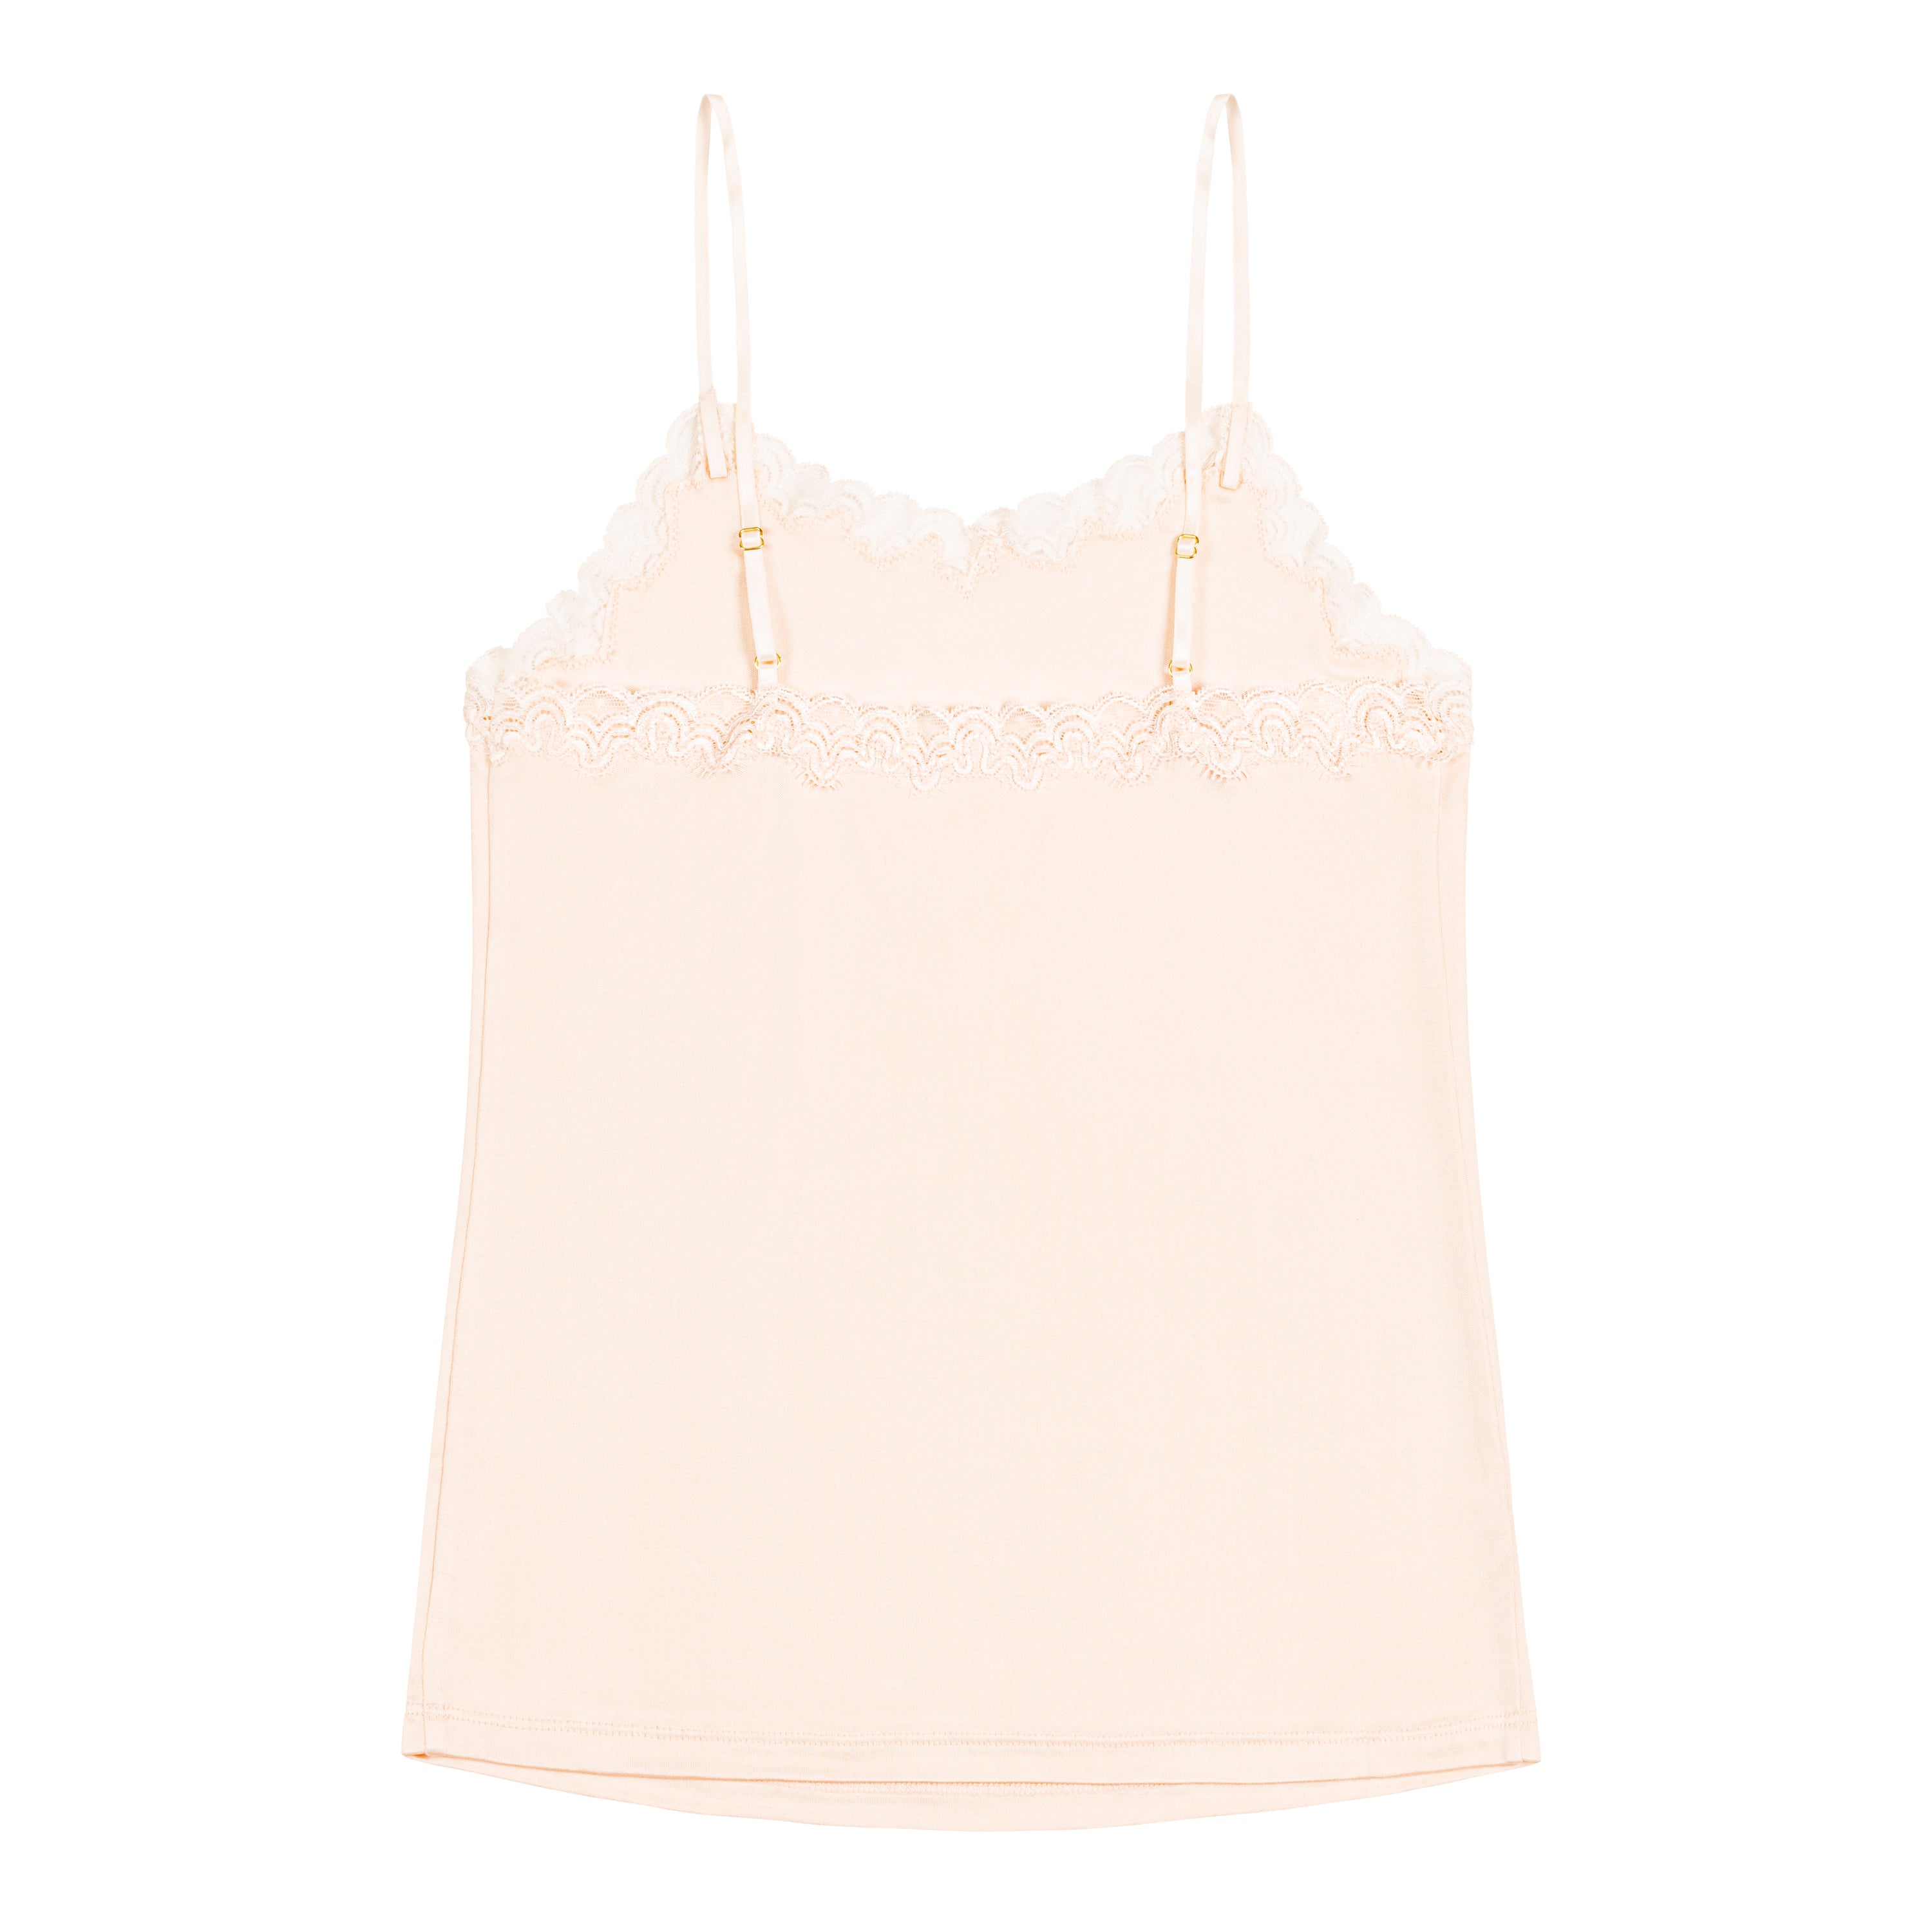 Lace-trimmed Satin Camisole Top - Light pink - Ladies